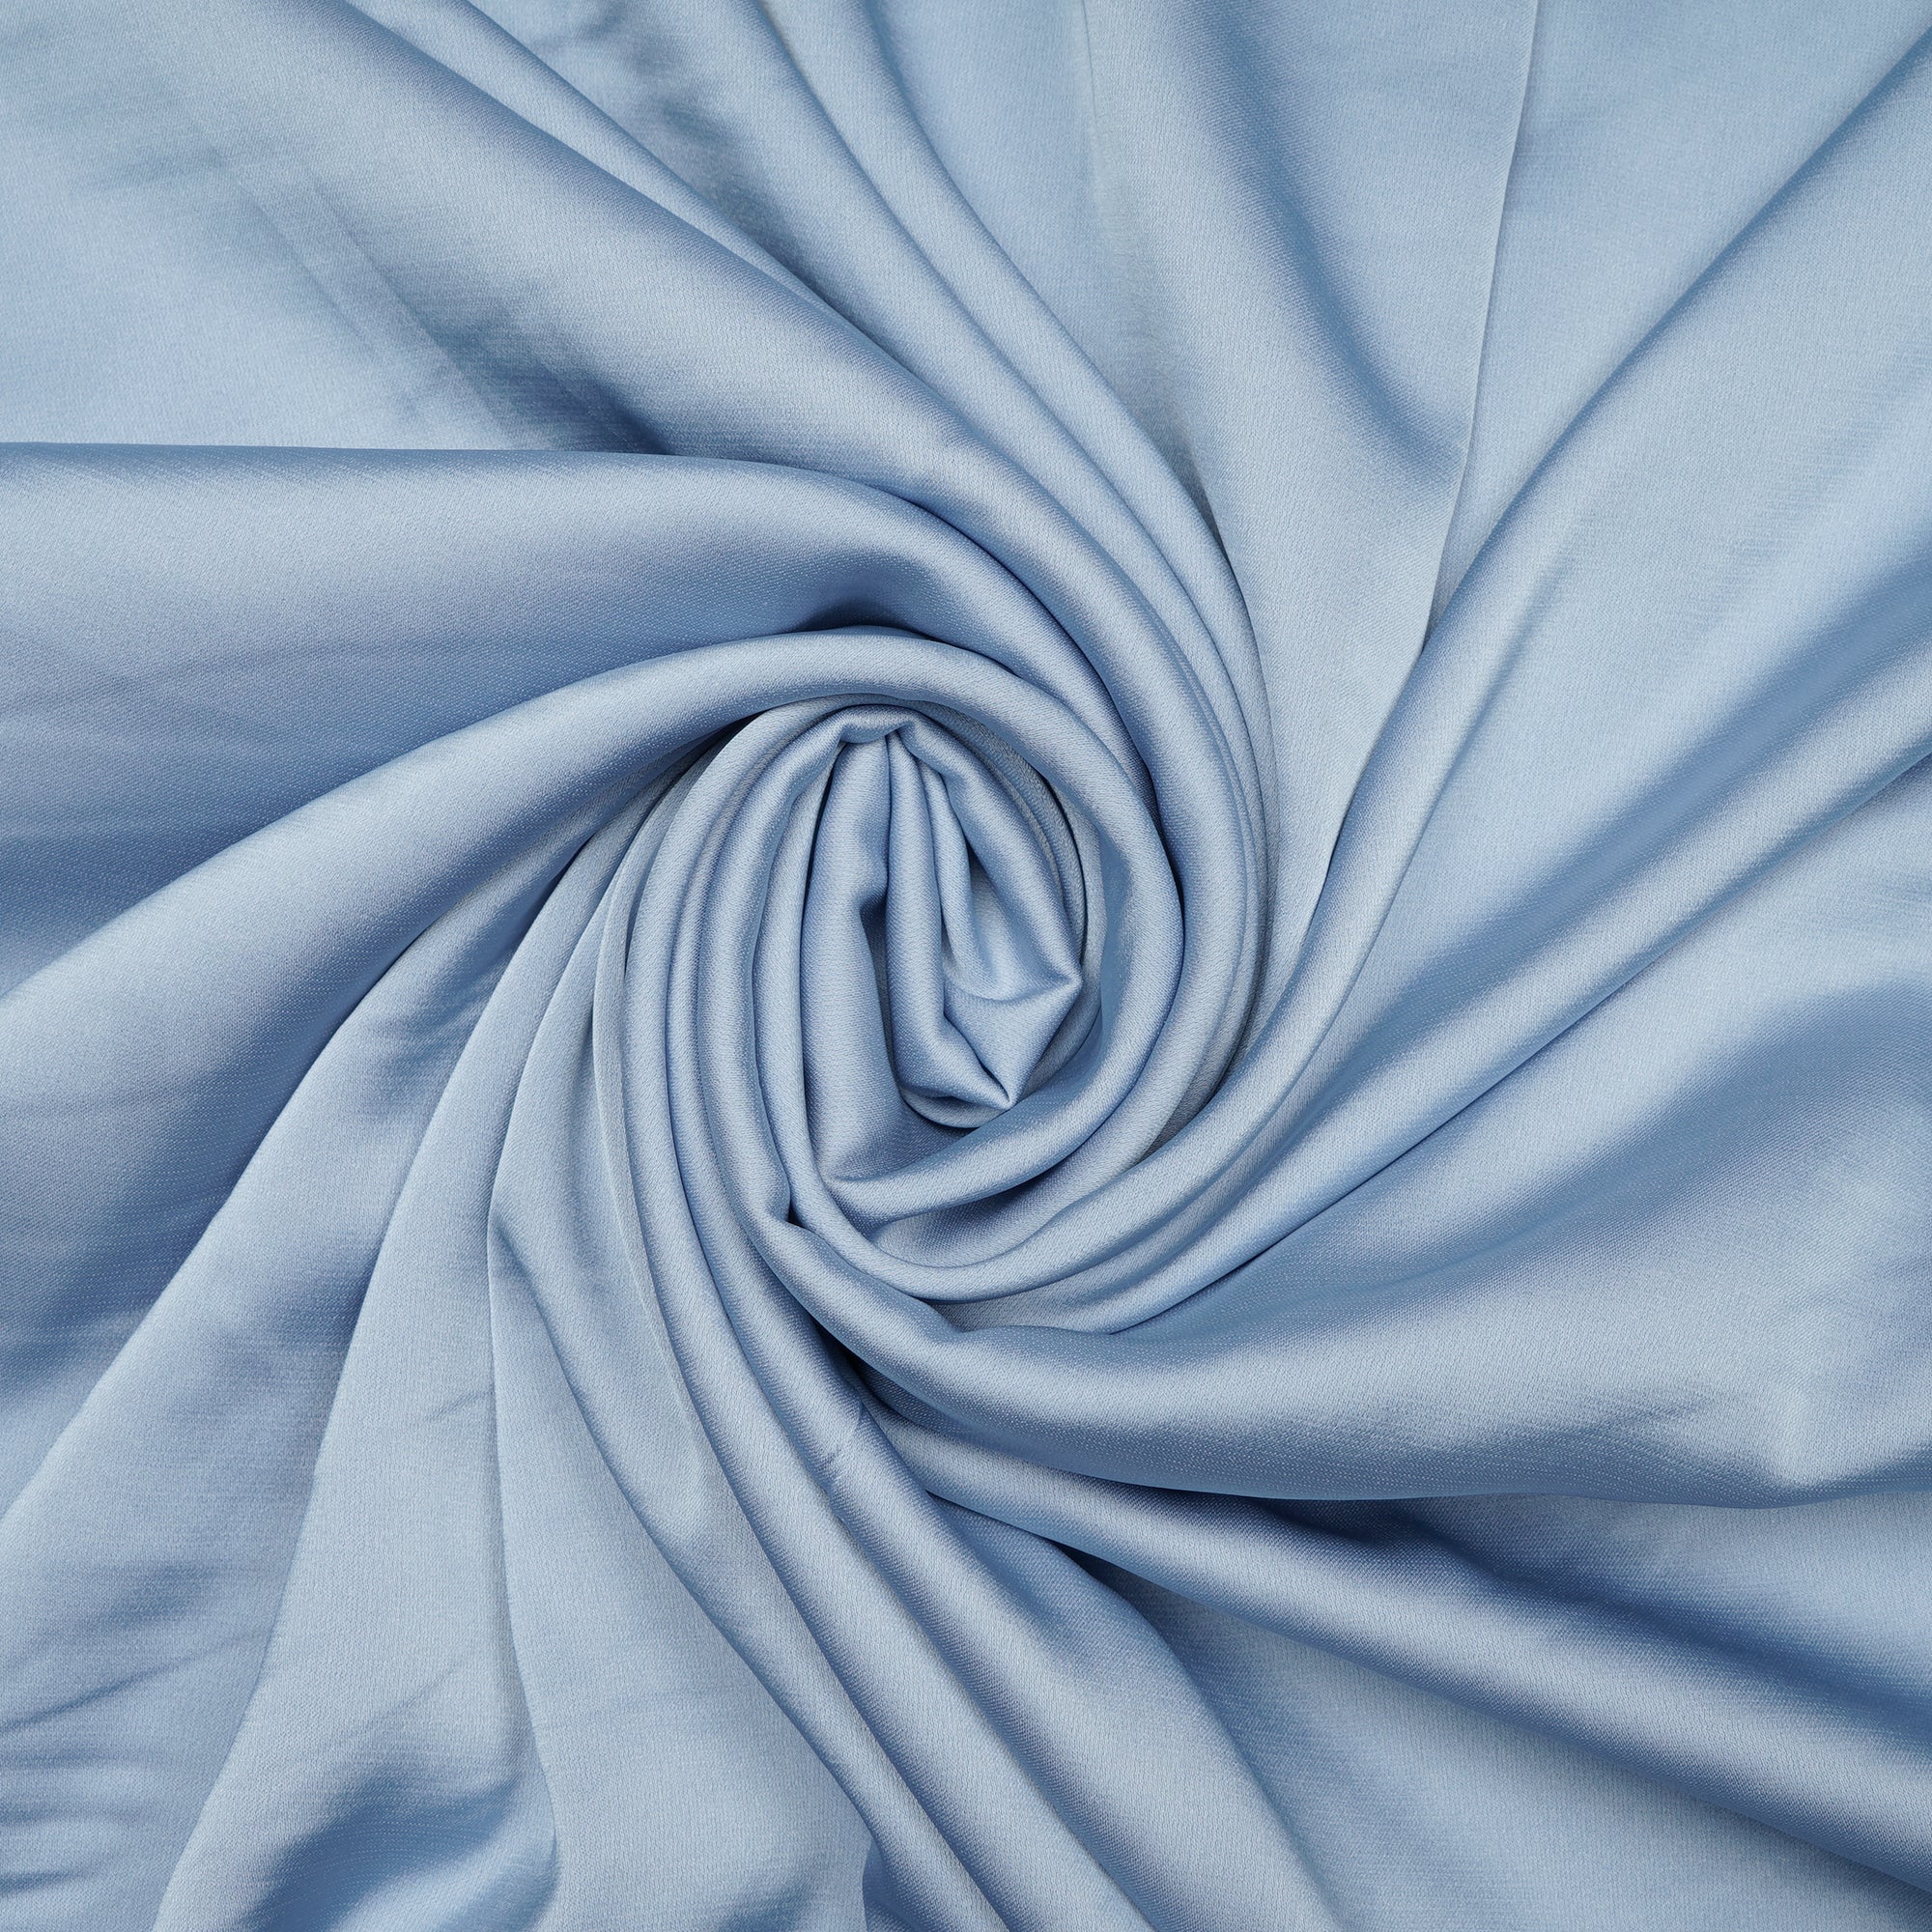 Alaskan Blue Solid Dyed Imported Armani Satin Fabric (60" Width)